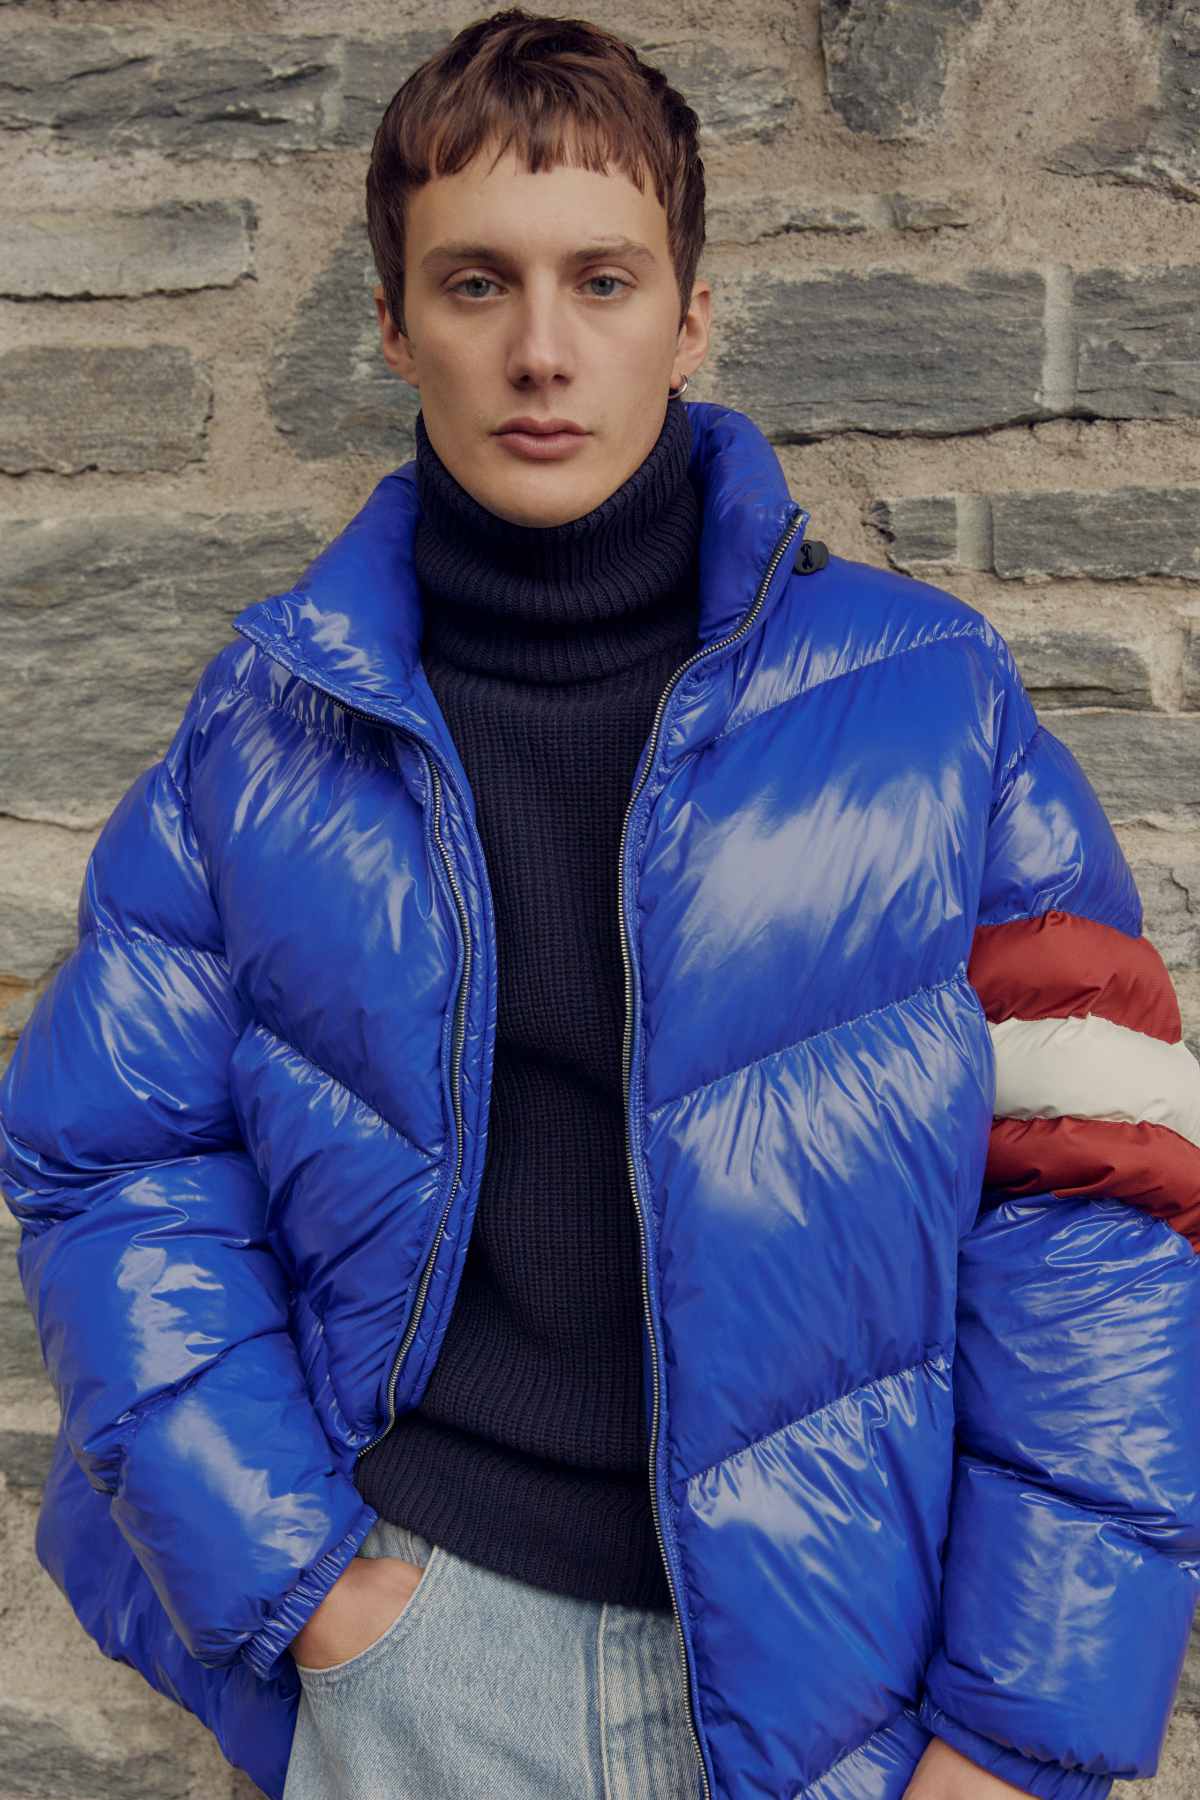 The Bally Winter Capsule Pays Tribute To The Mountain Landscape